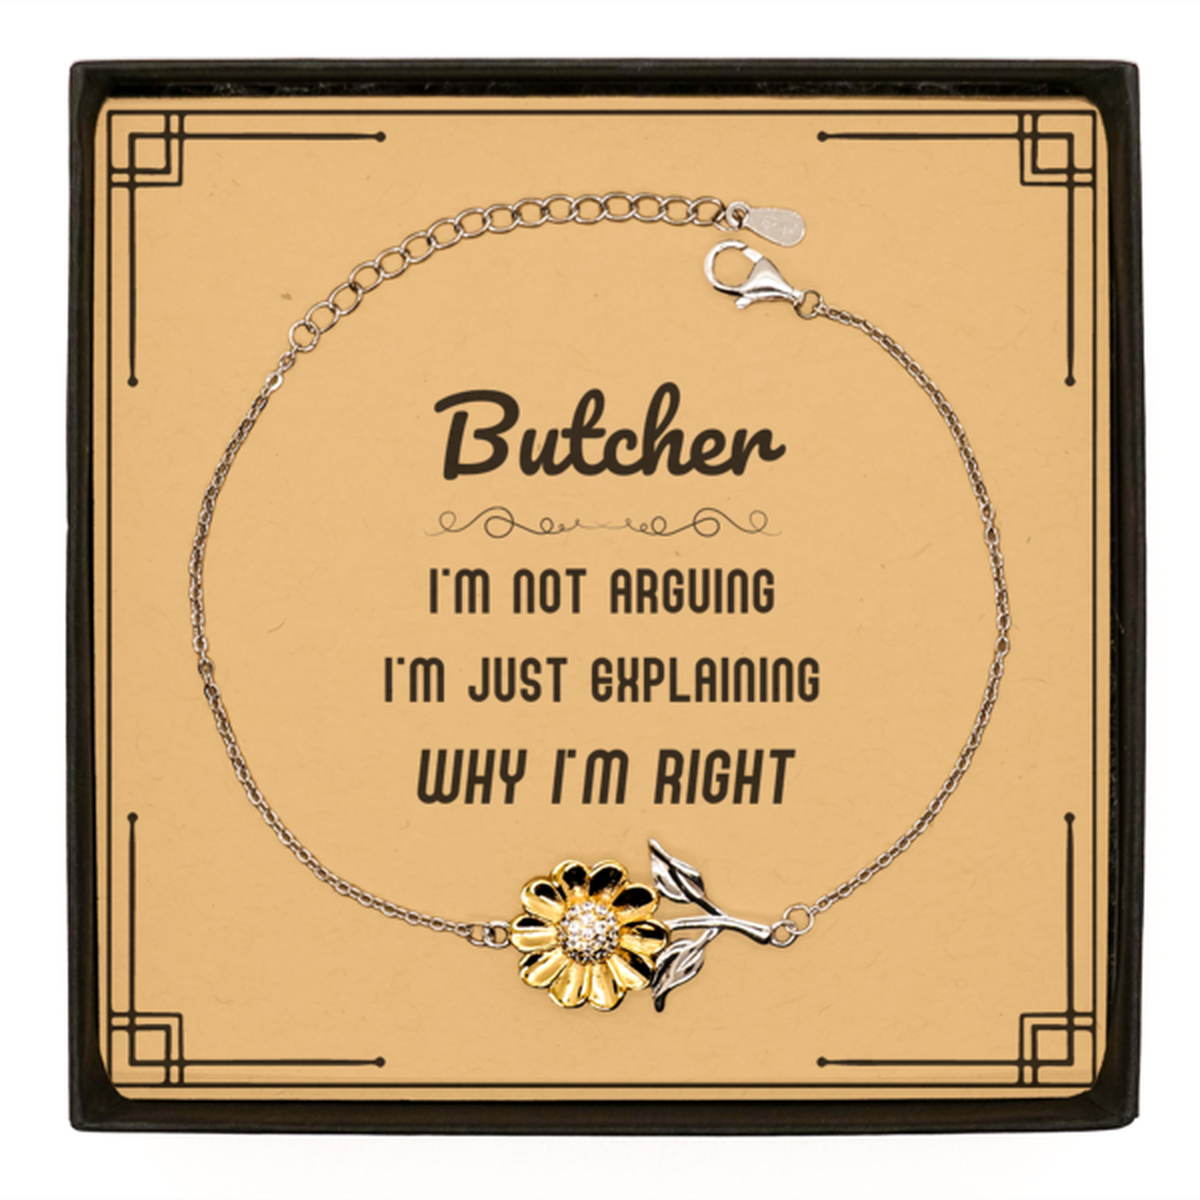 Butcher I'm not Arguing. I'm Just Explaining Why I'm RIGHT Sunflower Bracelet, Funny Saying Quote Butcher Gifts For Butcher Message Card Graduation Birthday Christmas Gifts for Men Women Coworker